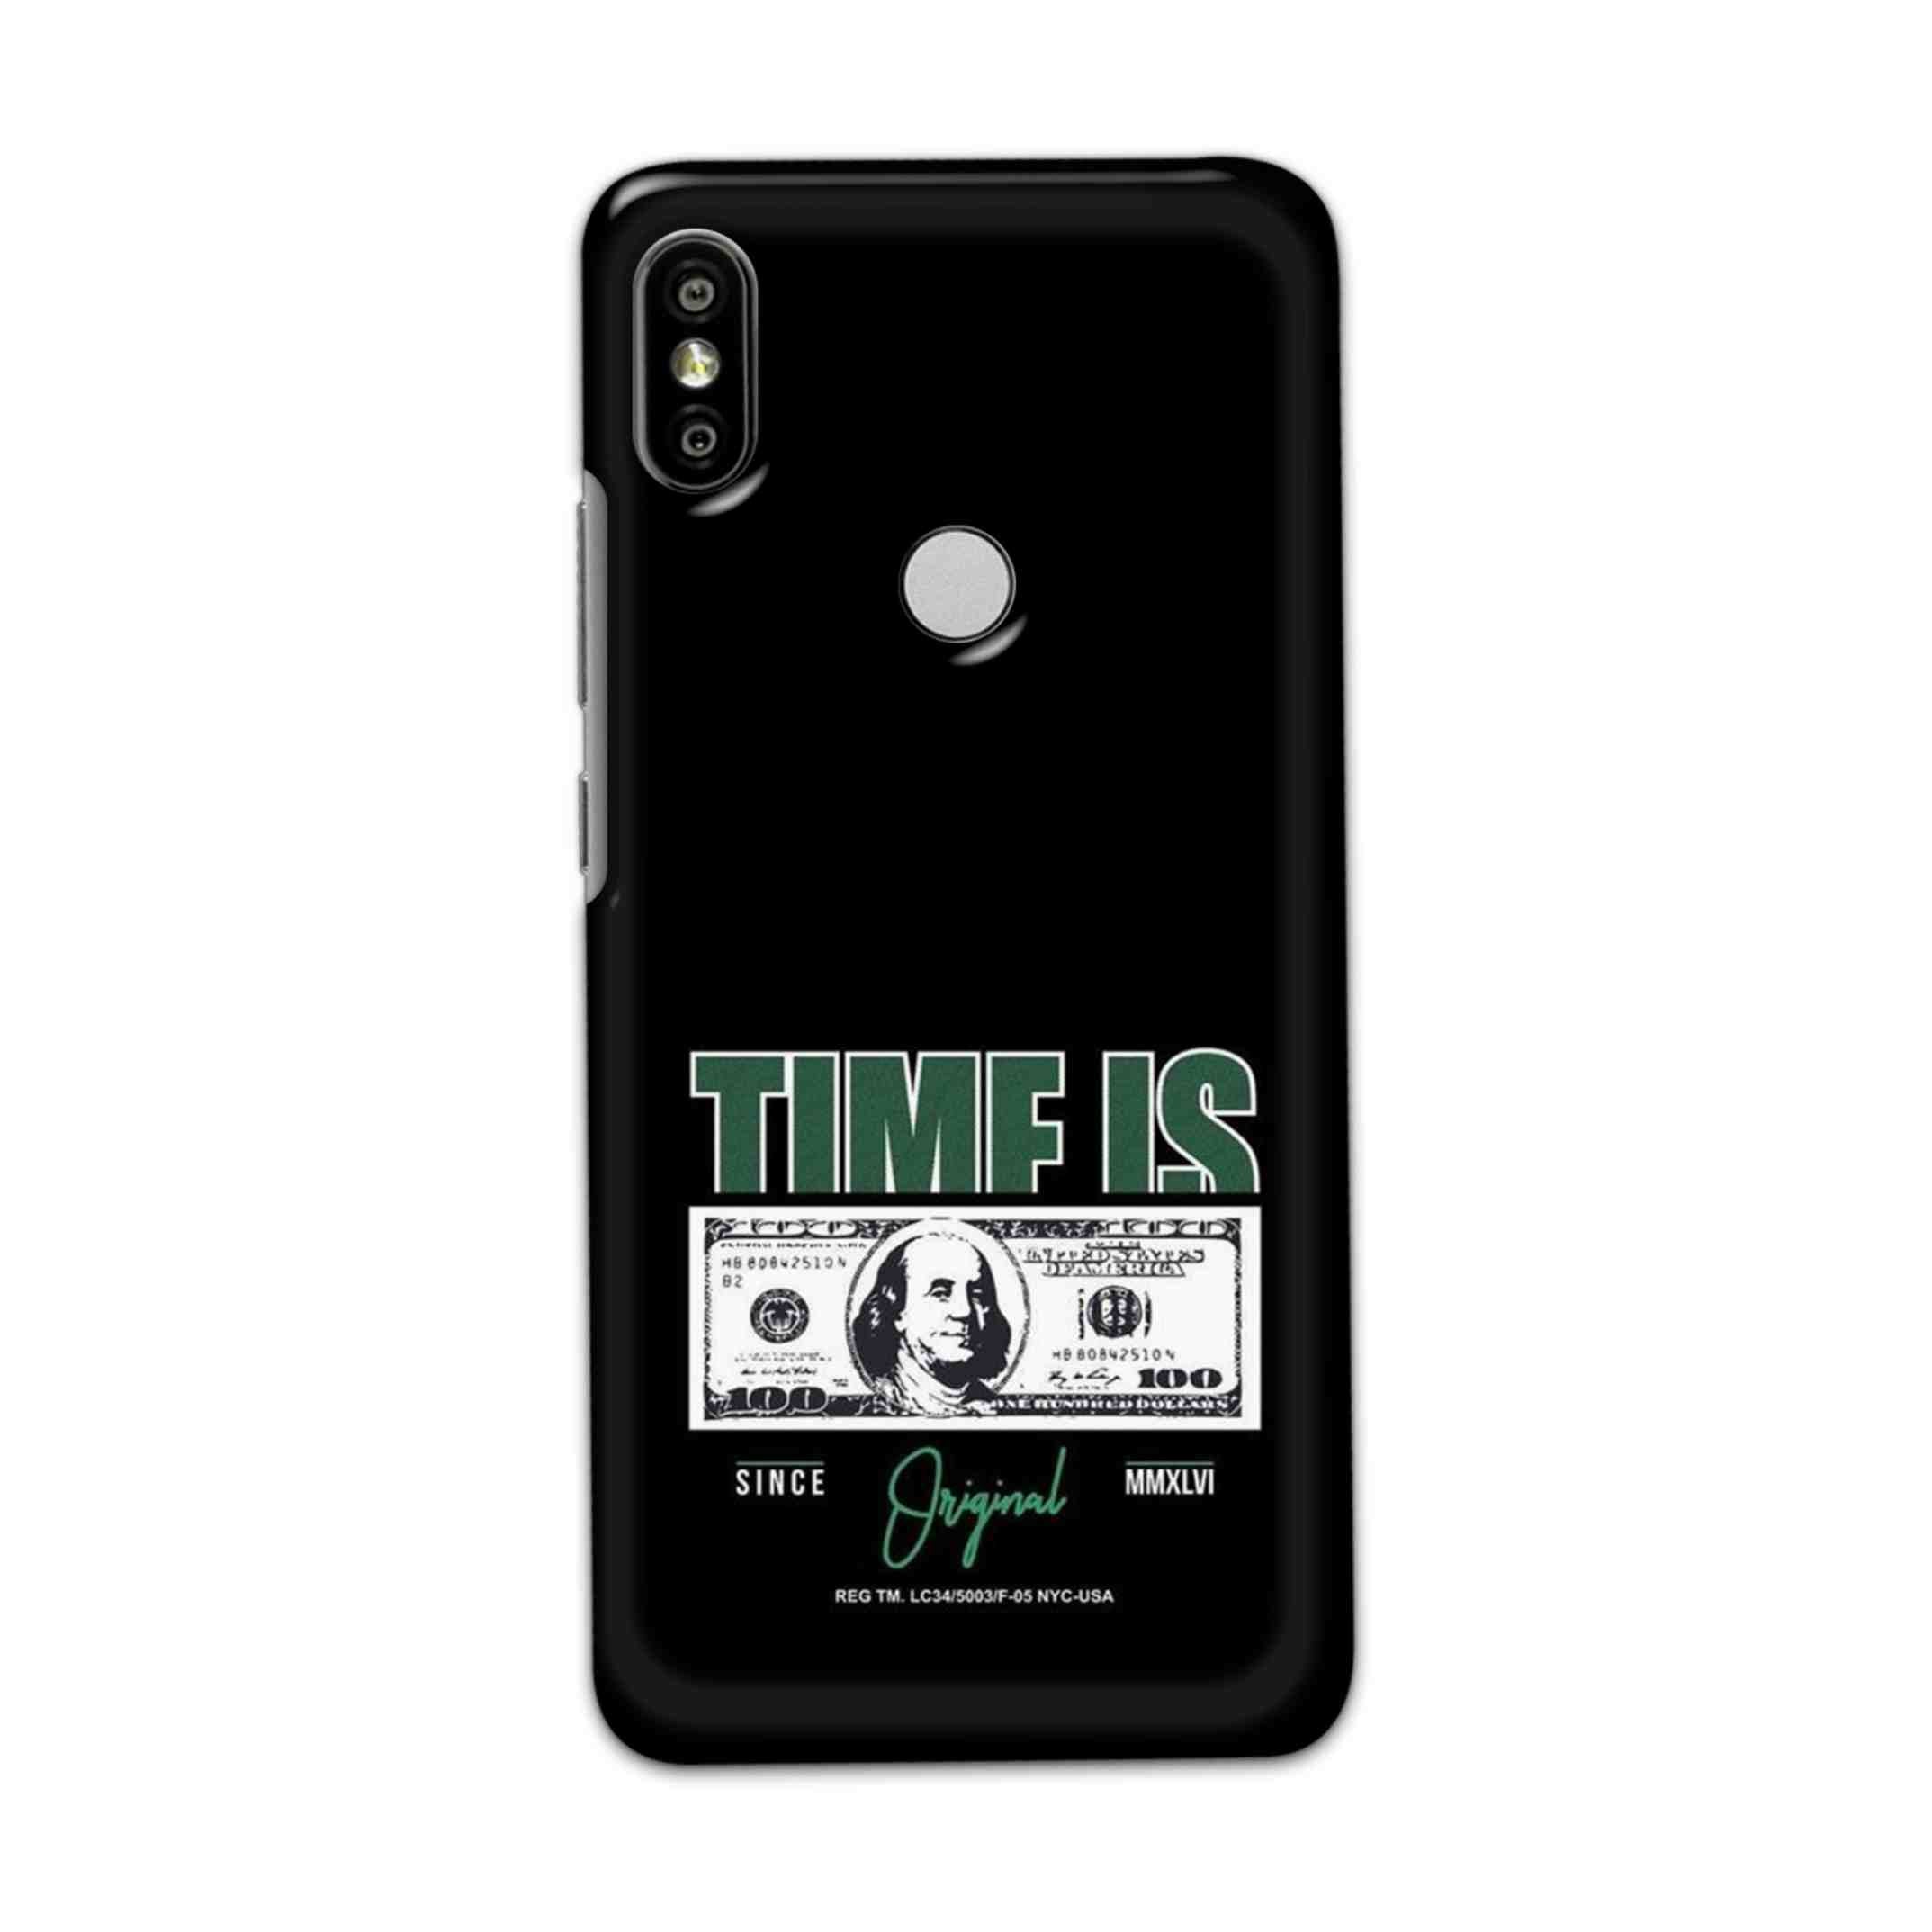 Buy Time Is Money Hard Back Mobile Phone Case Cover For Redmi S2 / Y2 Online